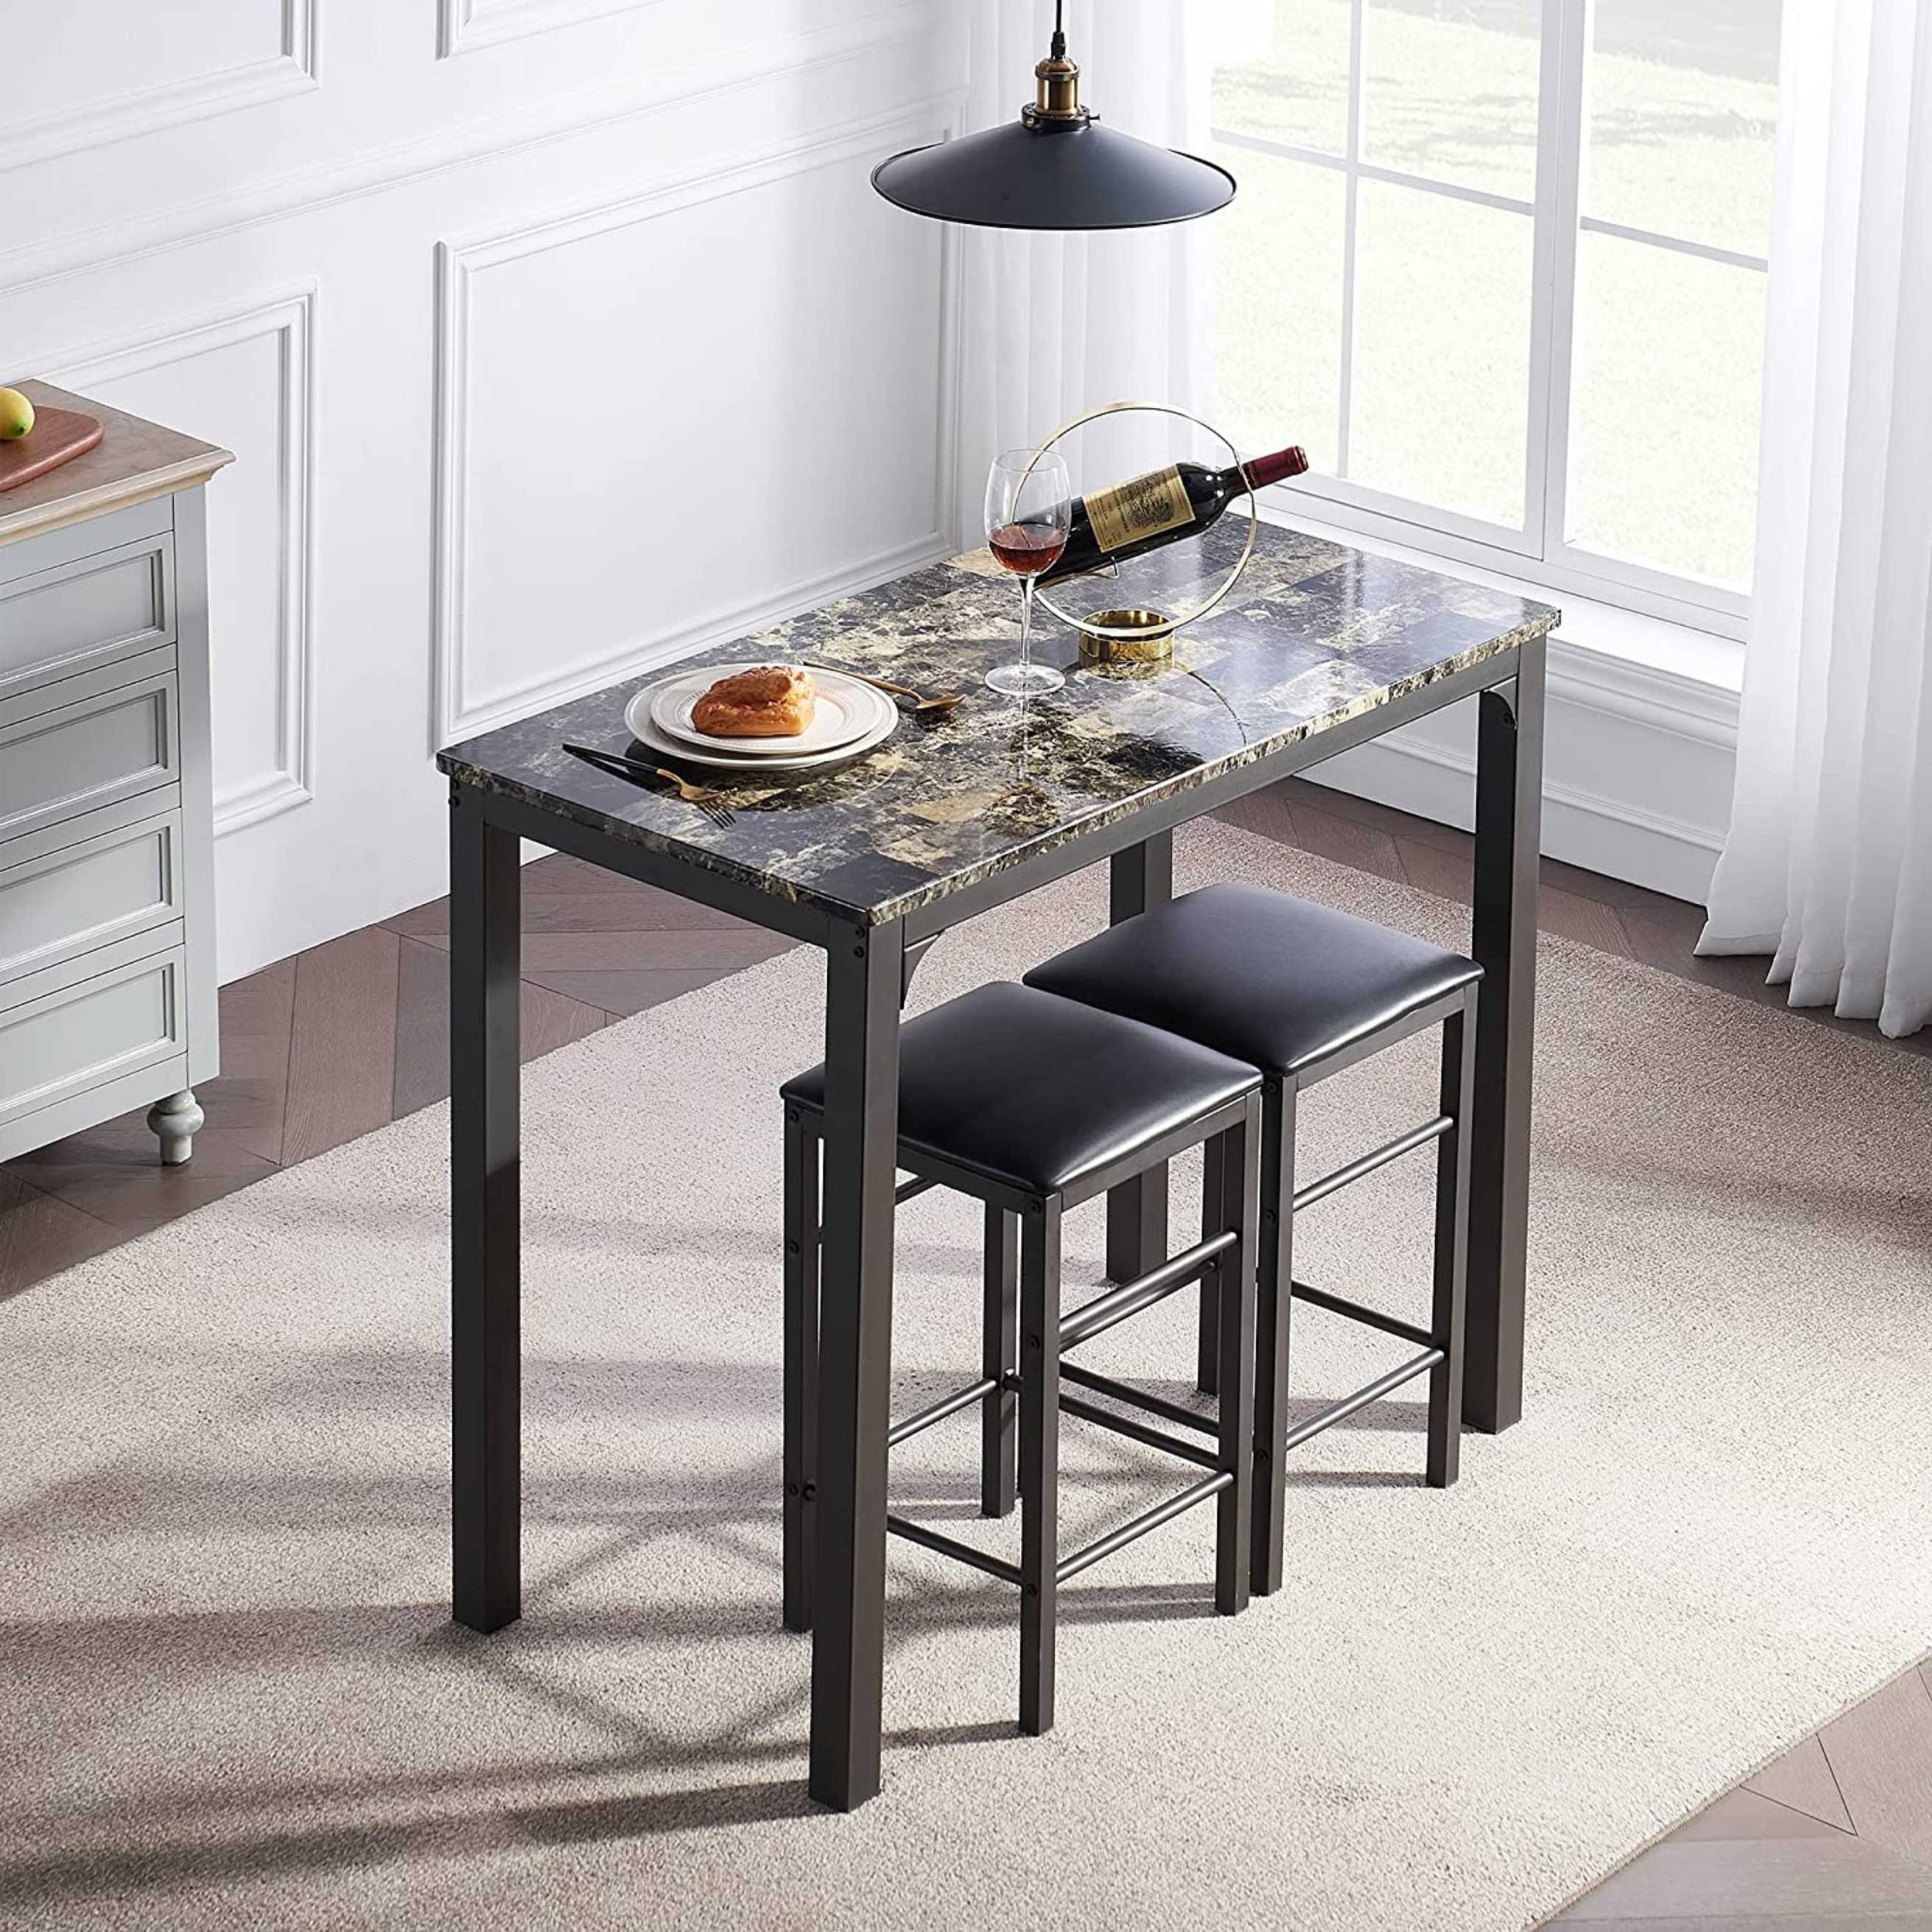 Compact Kitchen Dining Table with Two Stools.jpg